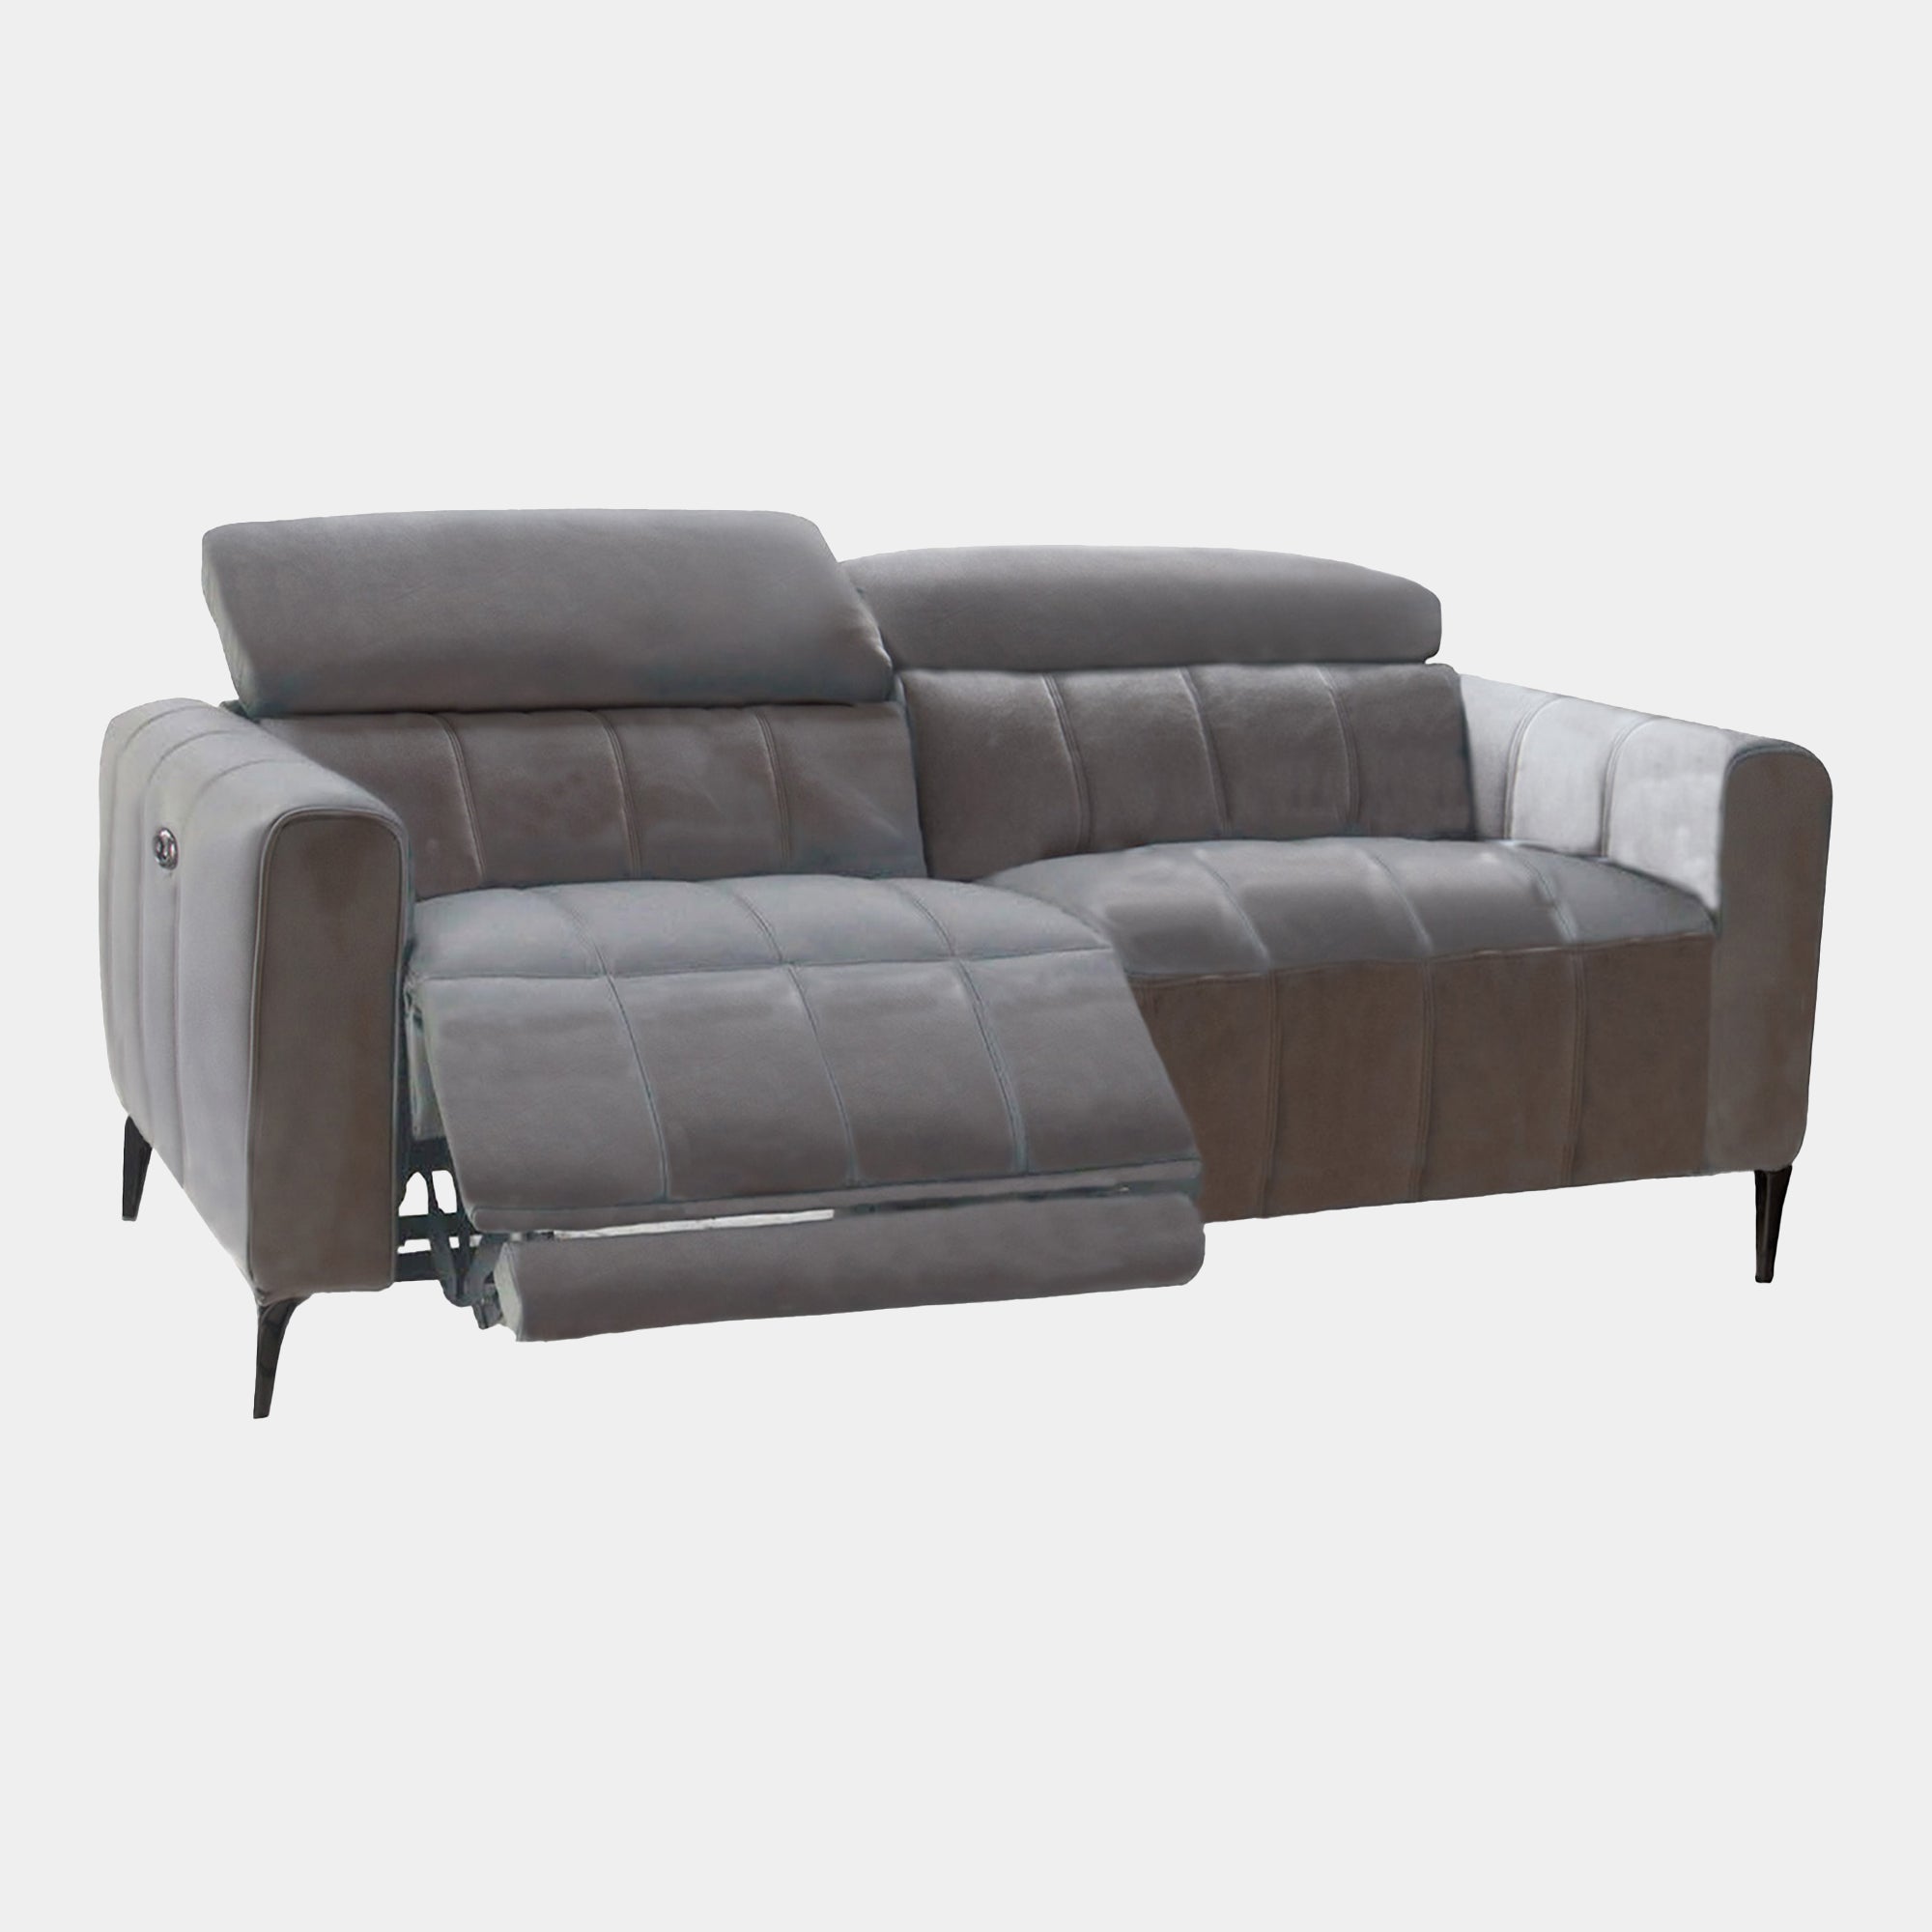 2 Seat Sofa With 2 Power Recliners & USB Toggle Switch In Fabric